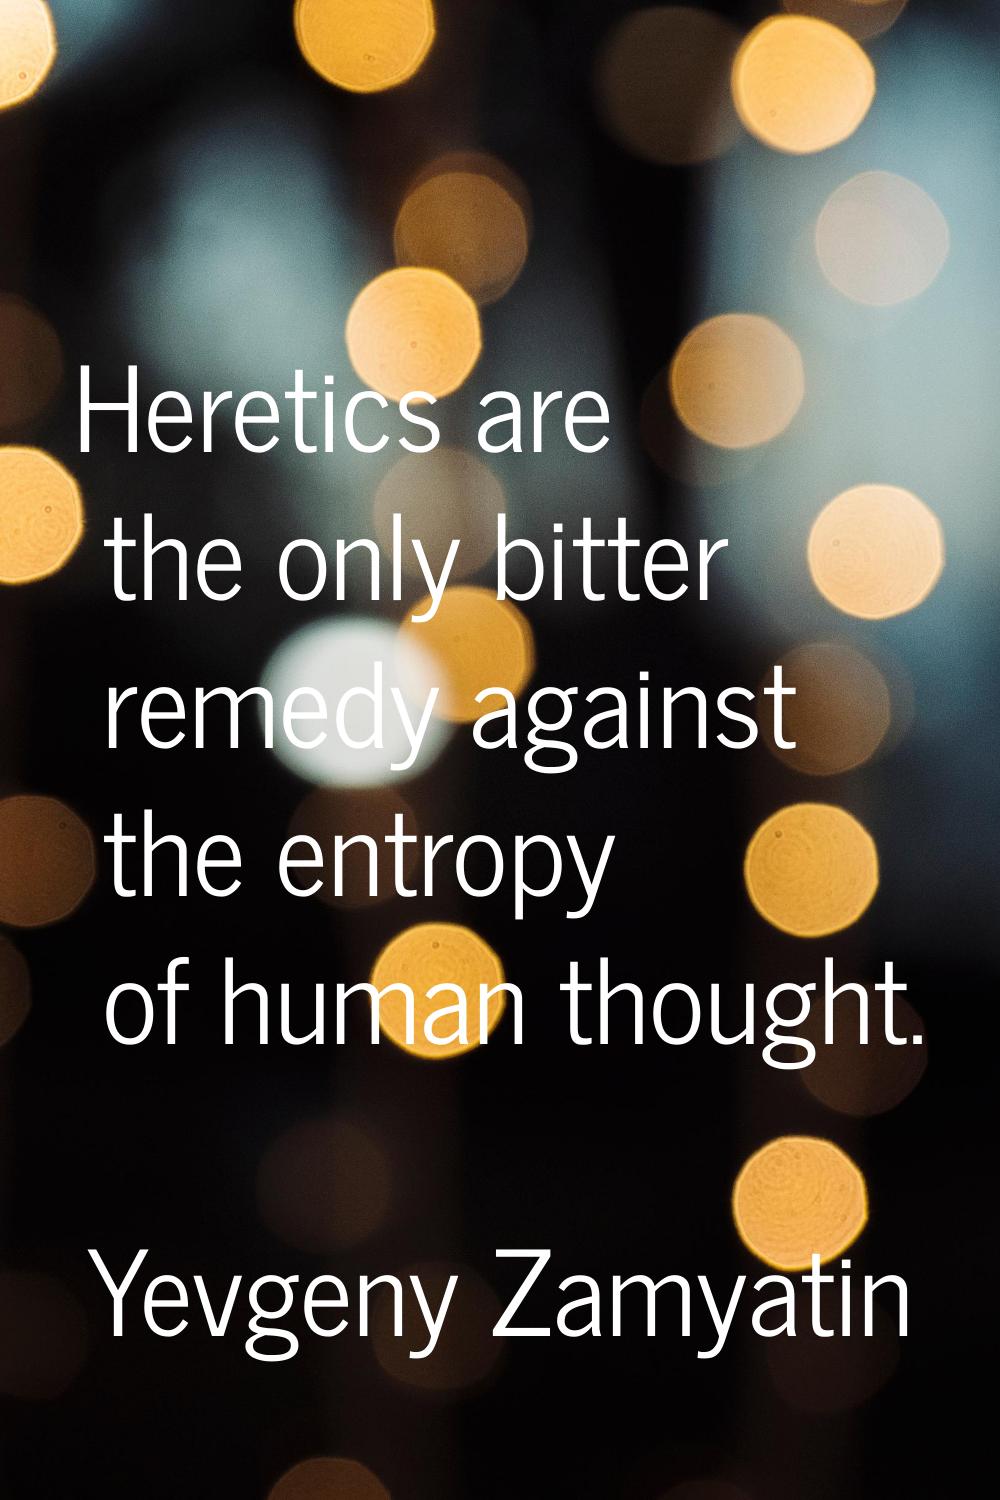 Heretics are the only bitter remedy against the entropy of human thought.